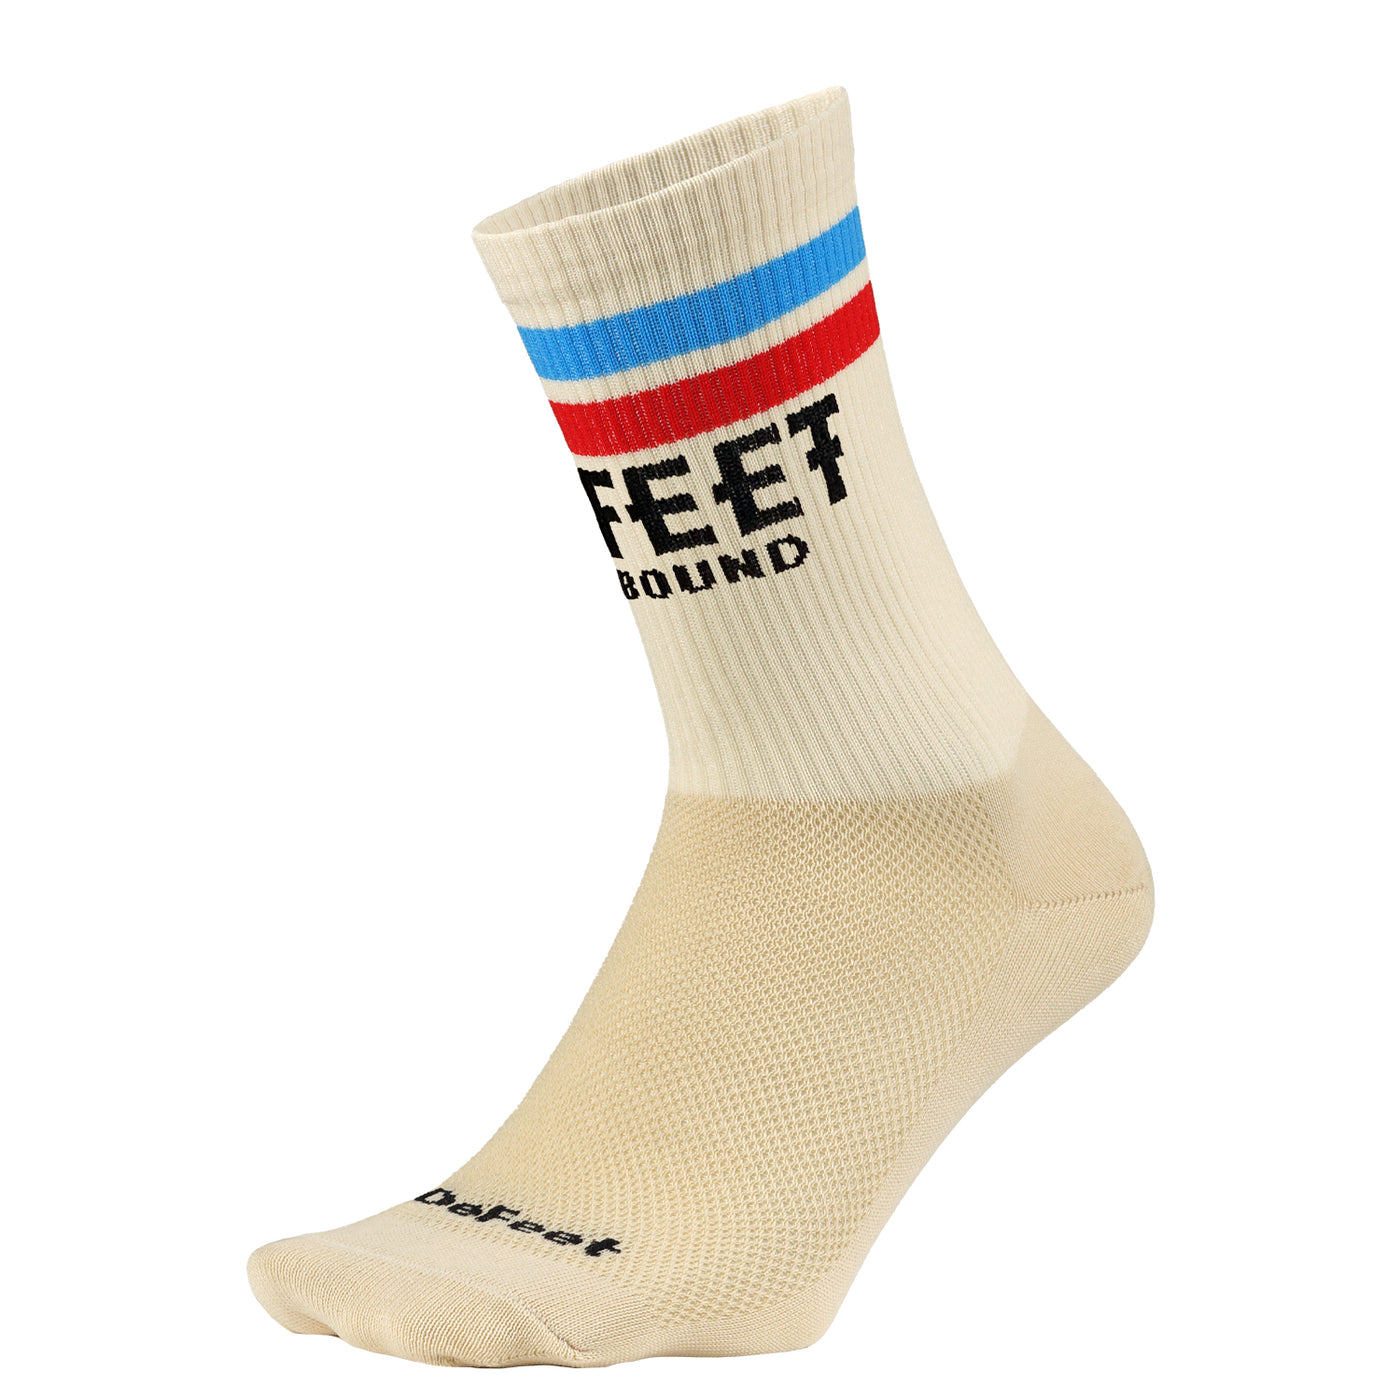 custom cream ribbed cycling sock for the Unbound Gravel race